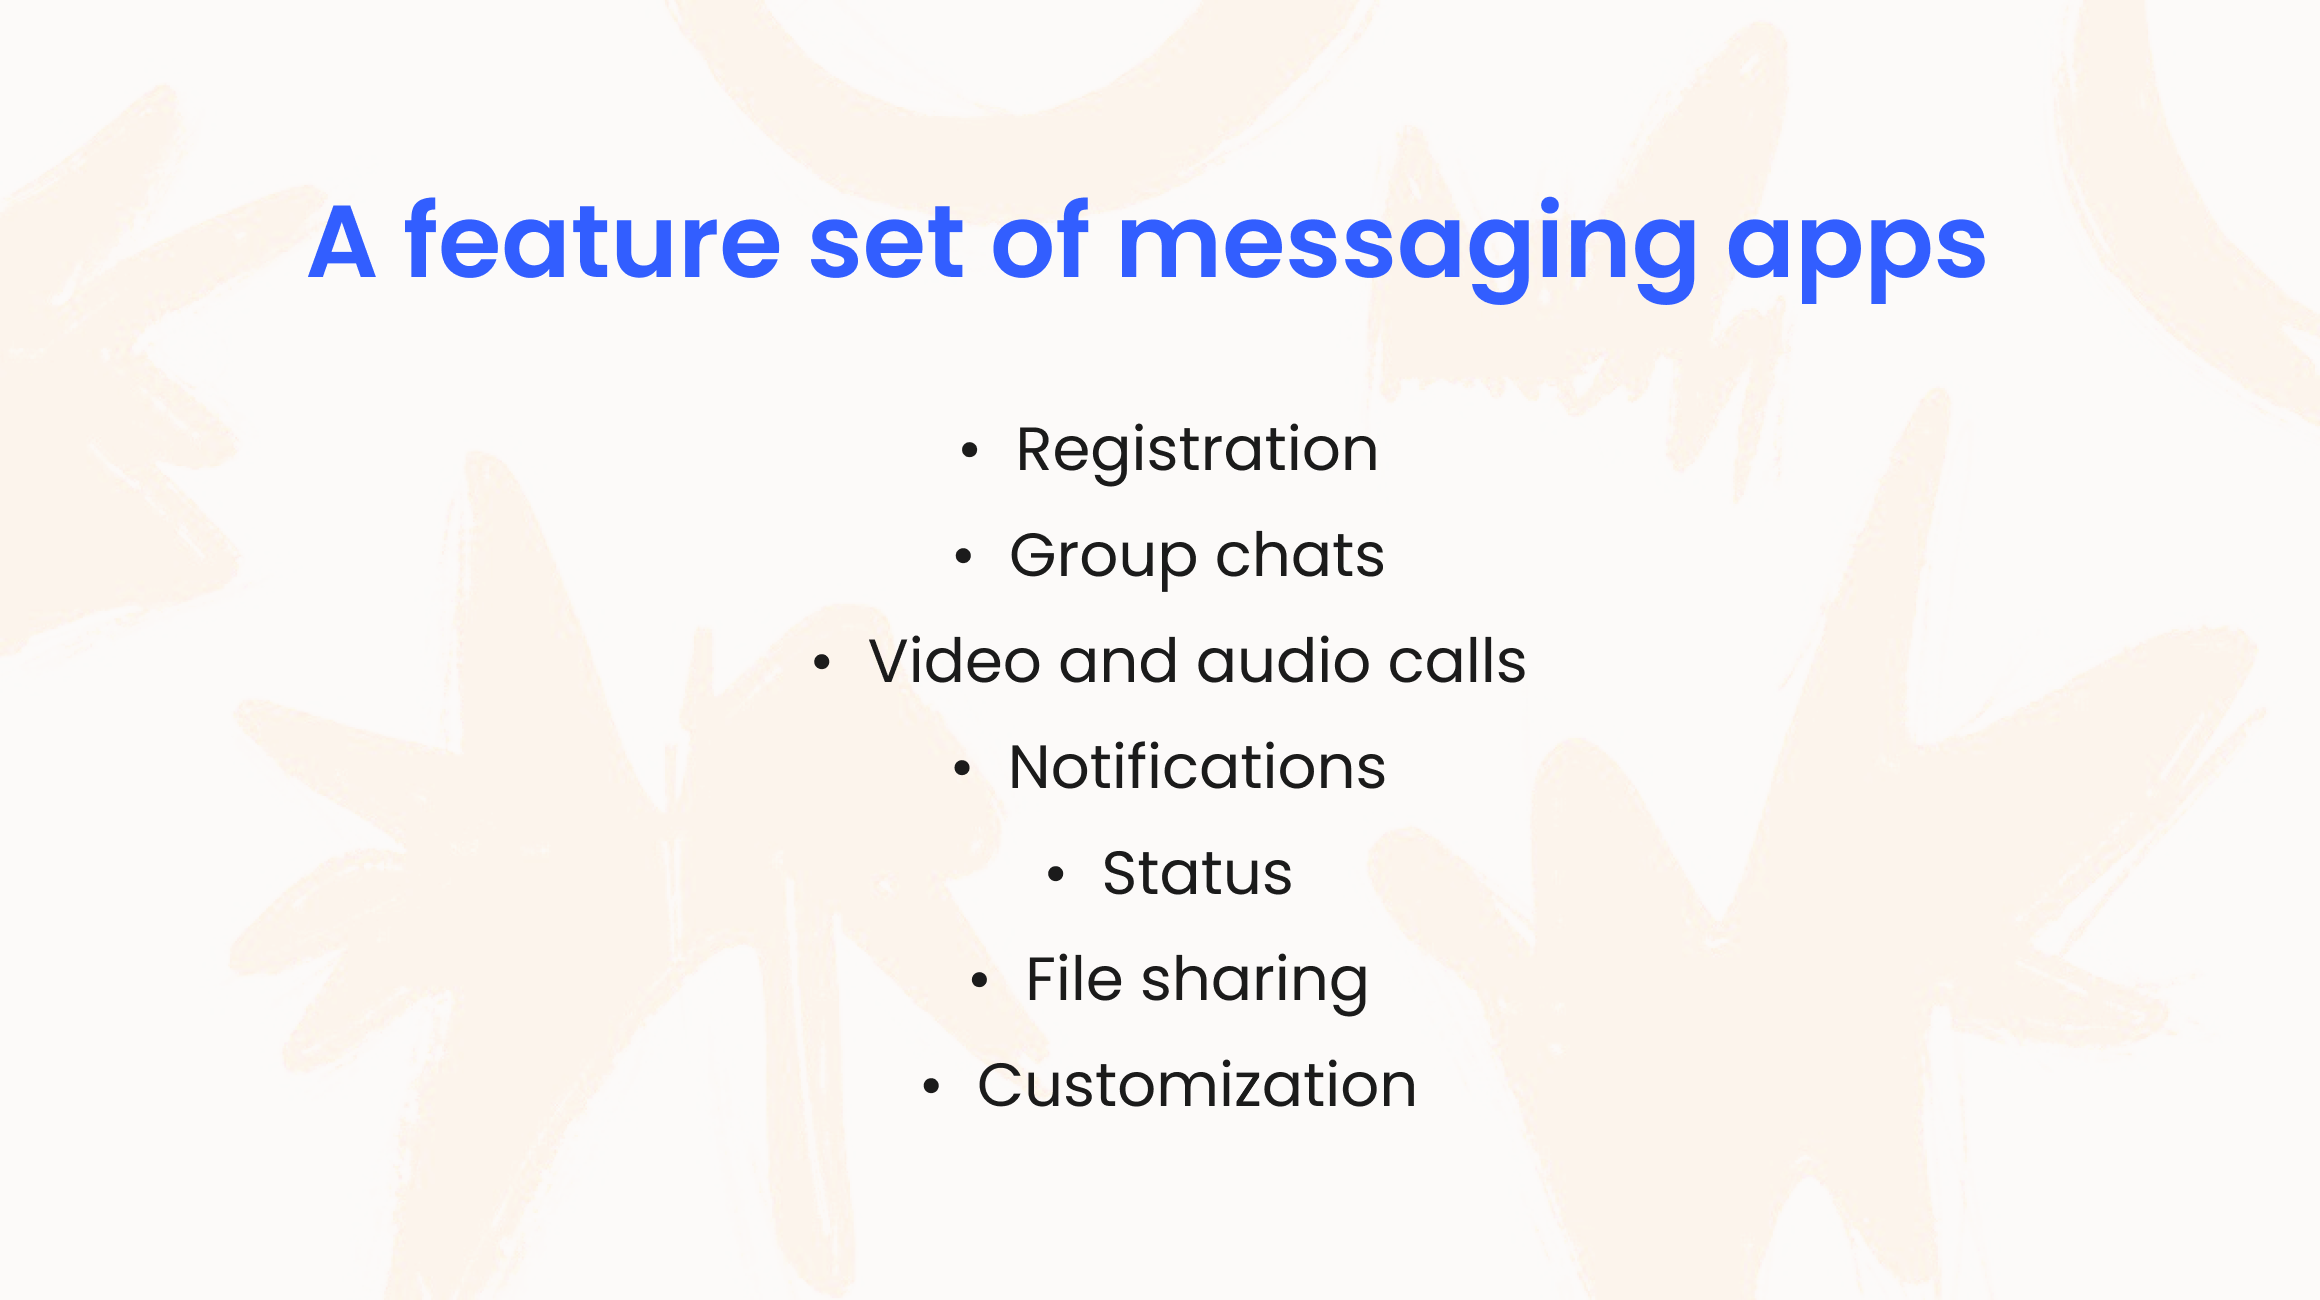 Features of messaging apps 